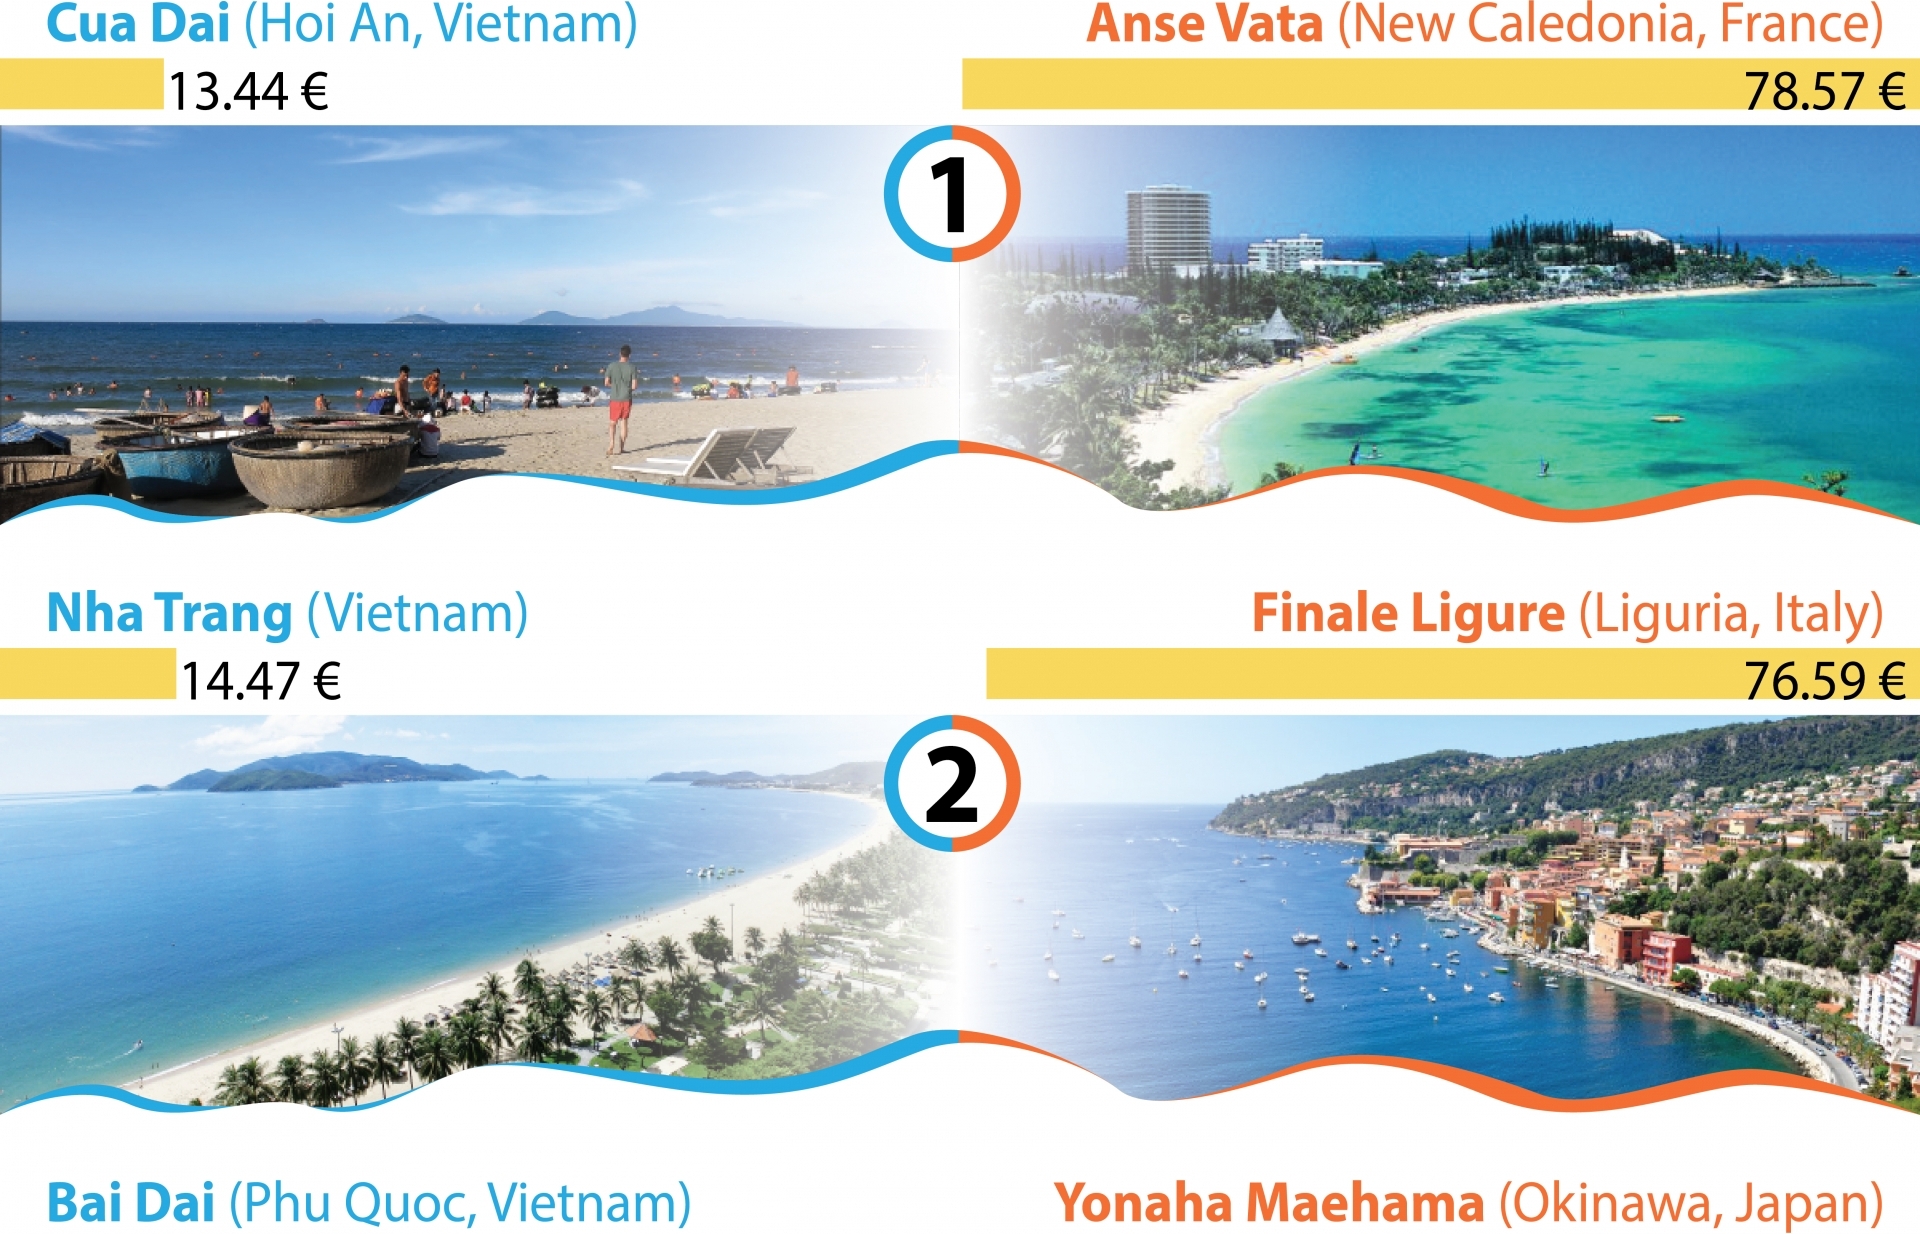 Vietnam has most affordable beaches